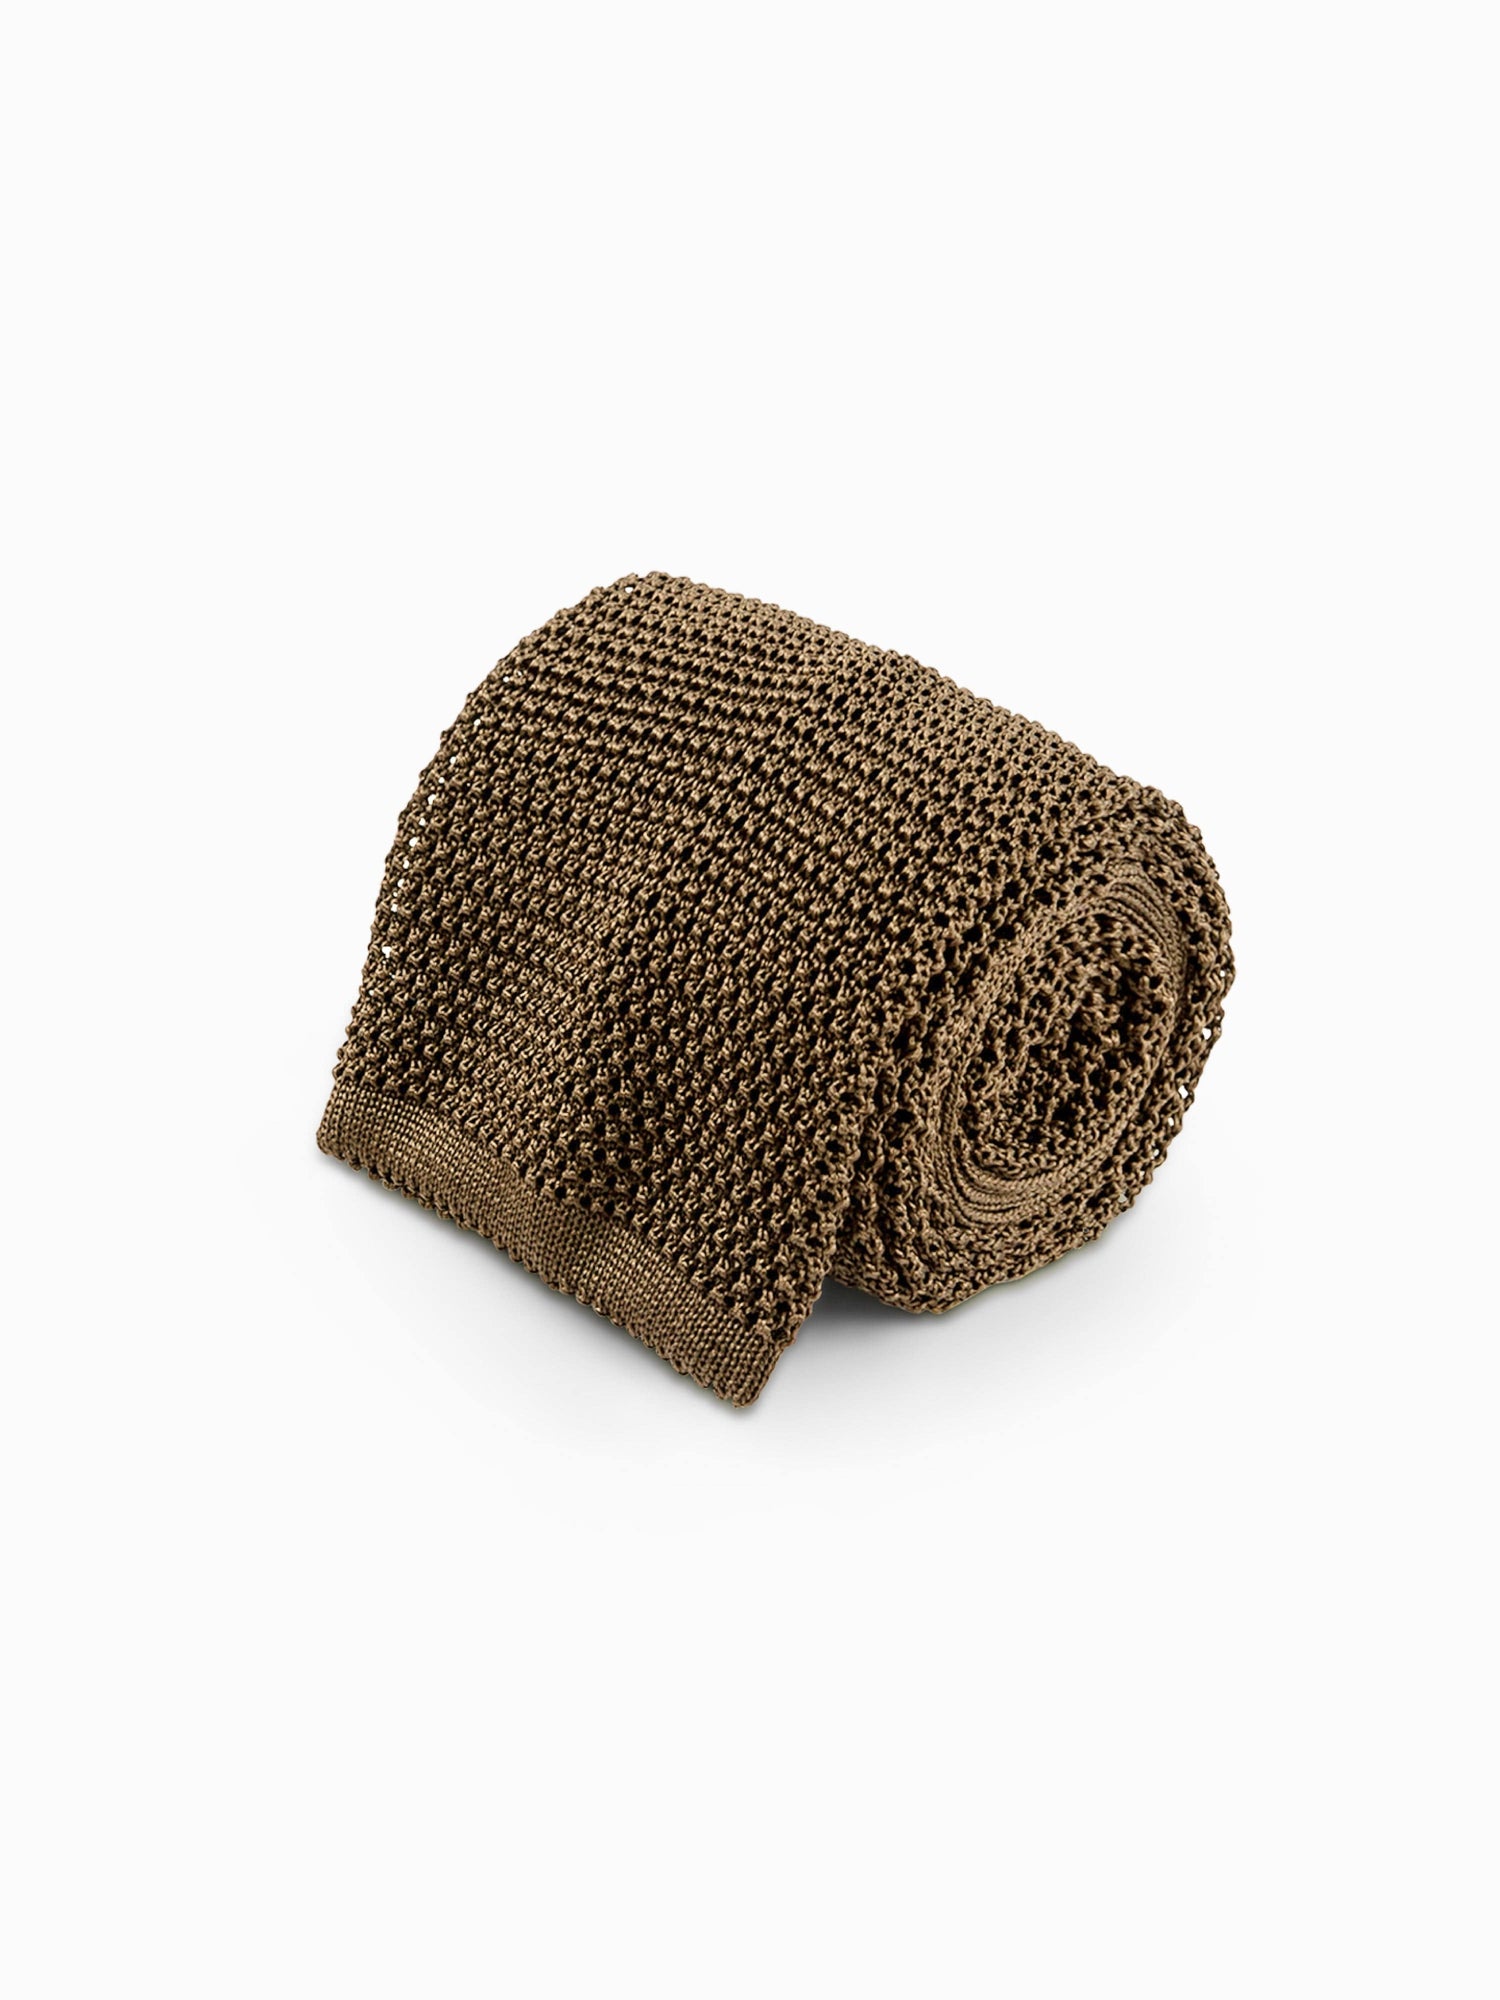 Taupe Knitted Tie - Grand Le Mar